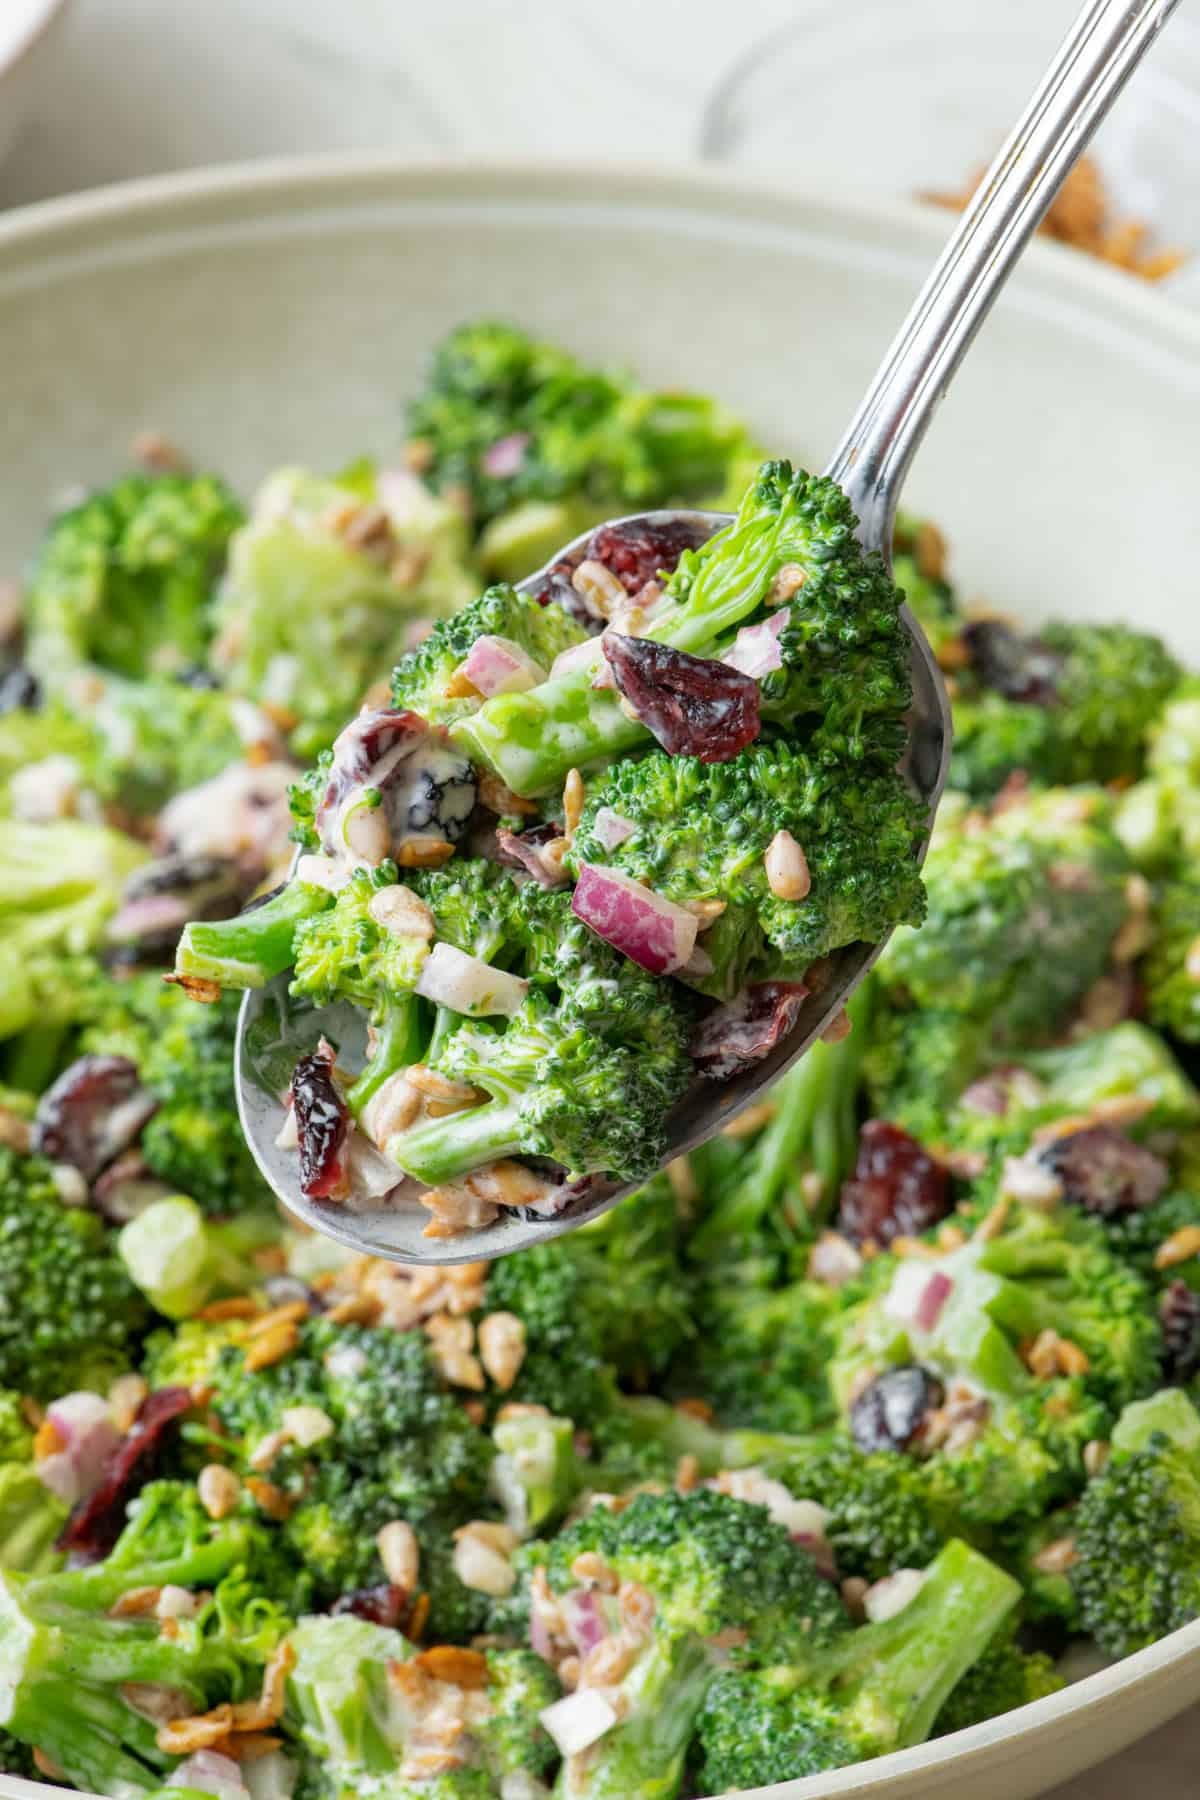 Spoon lifting up broccoli salad up close with bowl of recipe below.